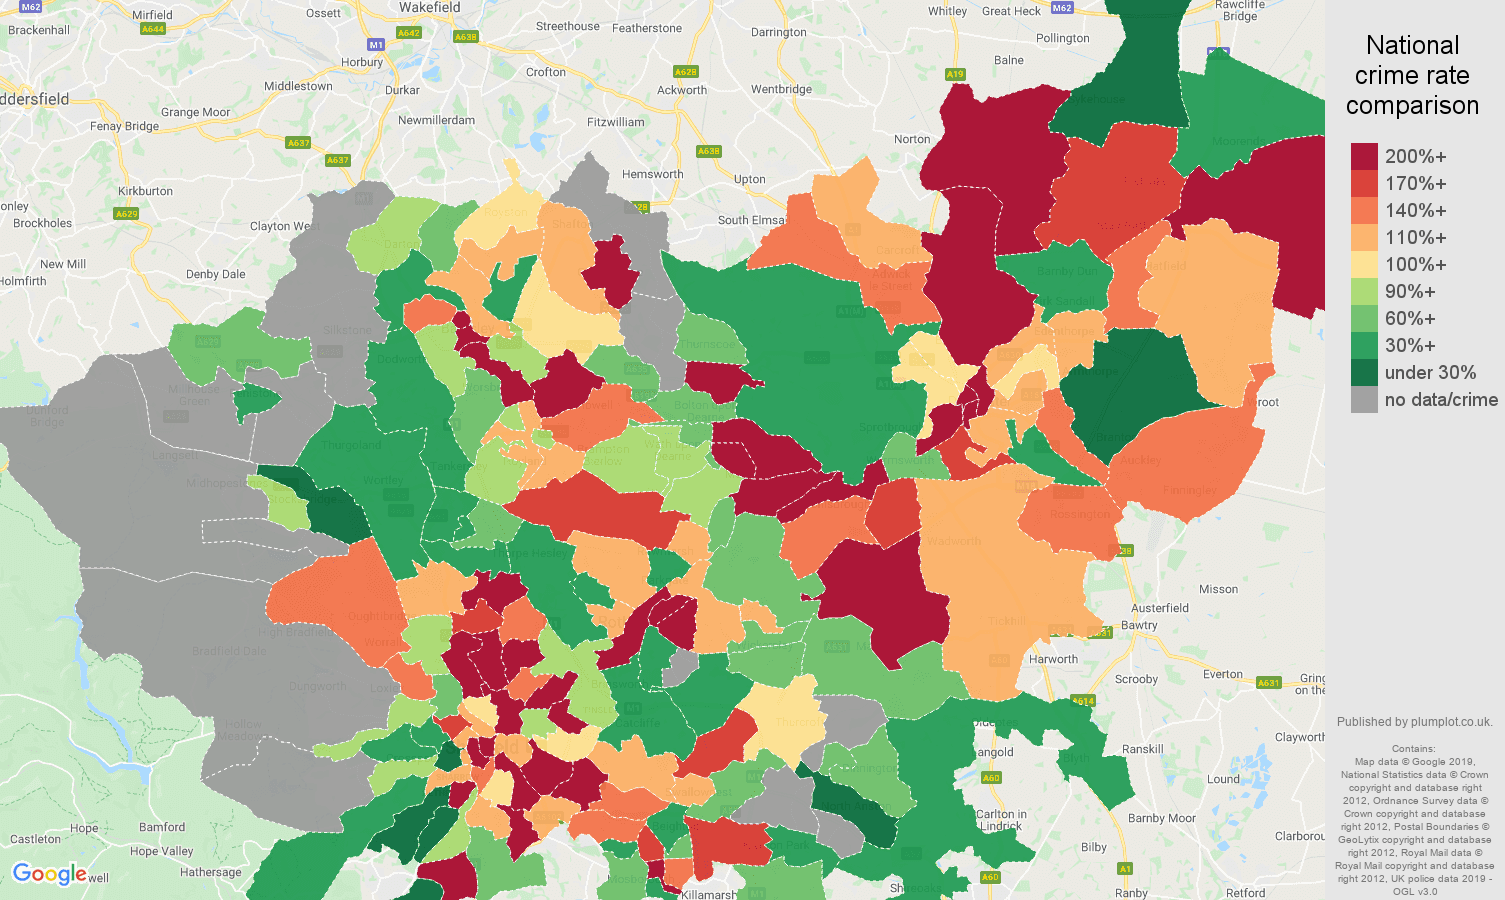 South Yorkshire possession of weapons crime rate comparison map